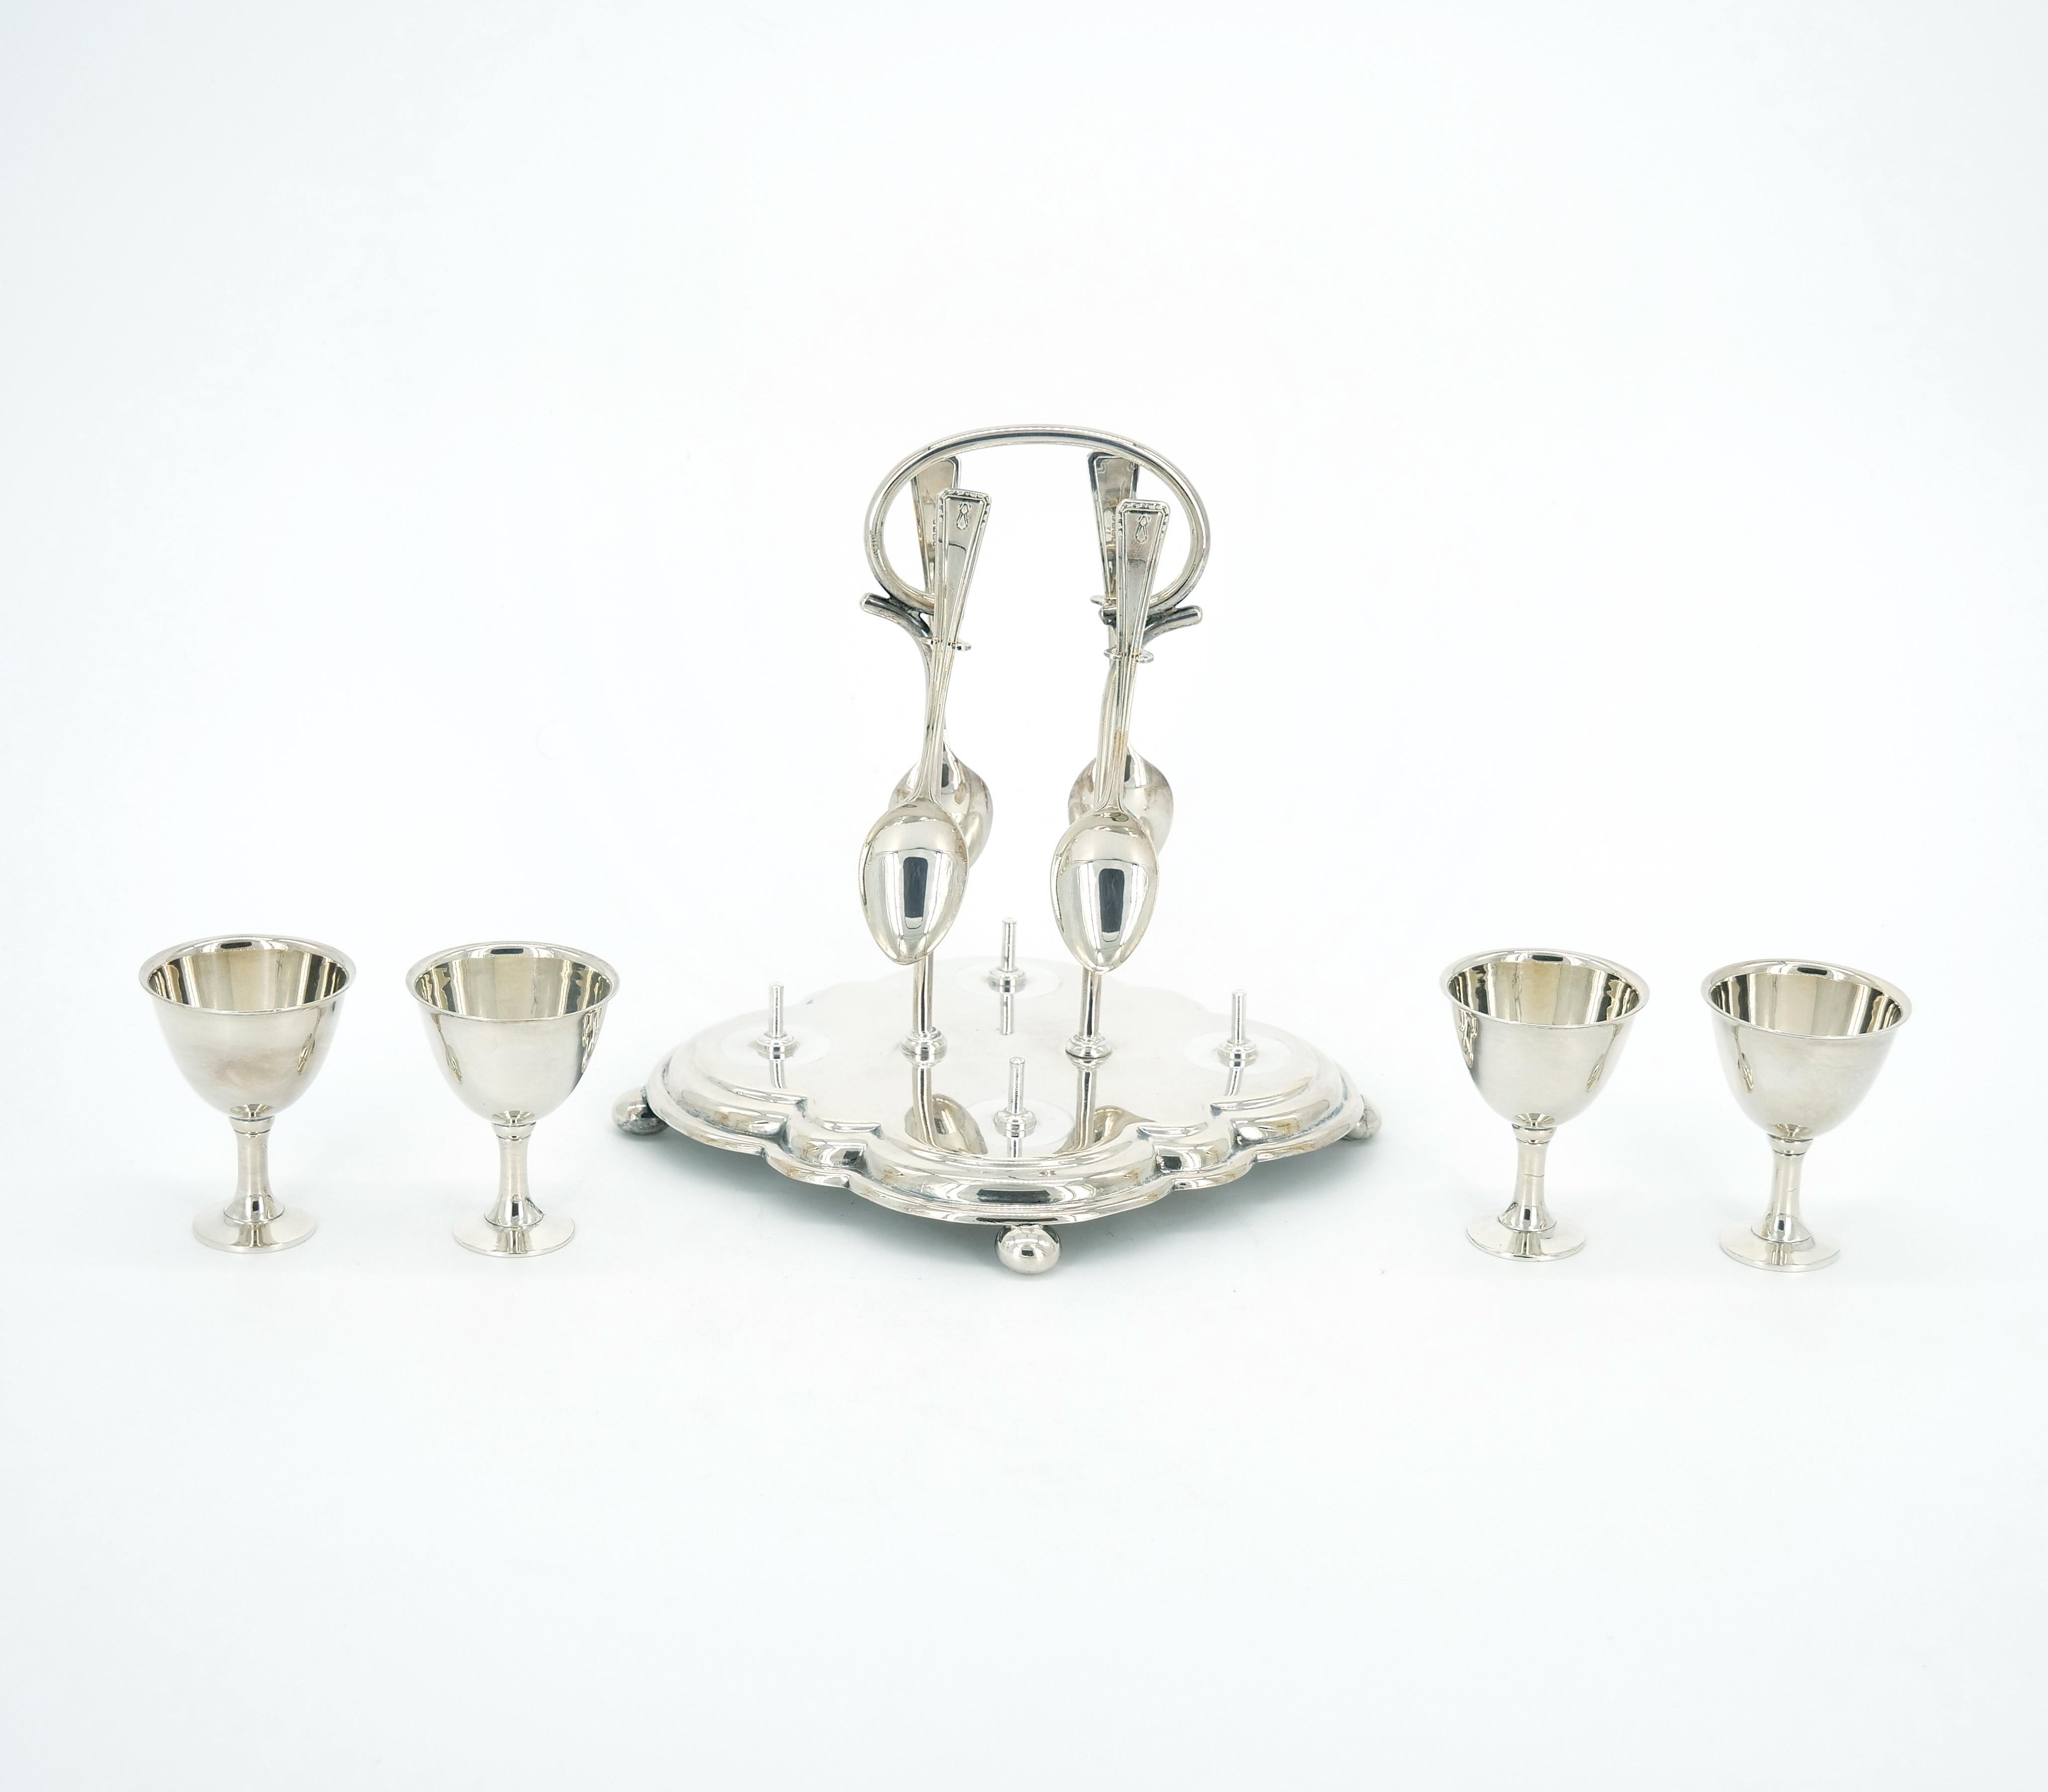 English Silver Plate Tableware Four Eggs Holder Service / Spoons 2